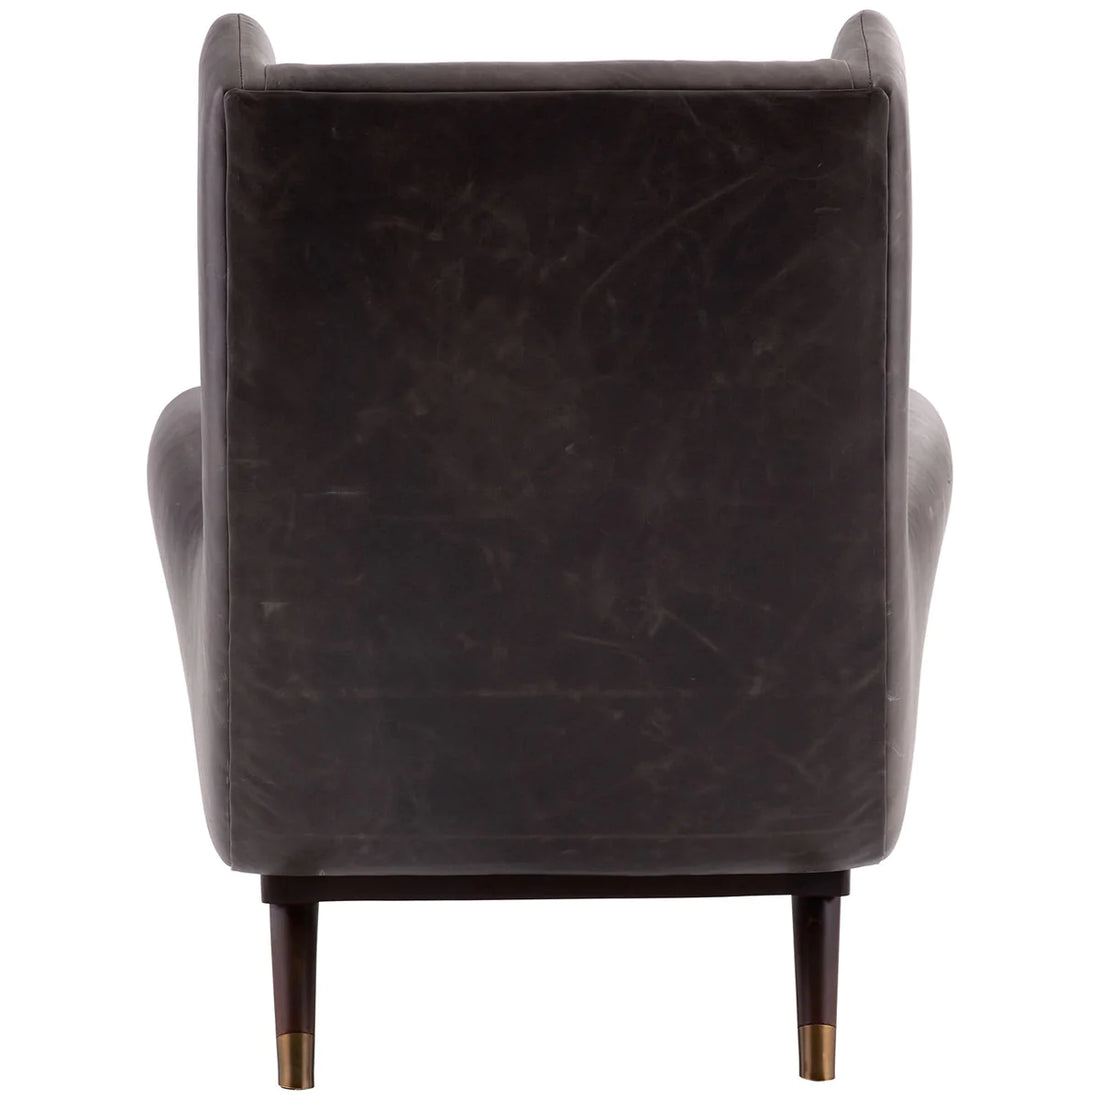 Arteriors Ophelia Lounge Chair - Graphite Leather